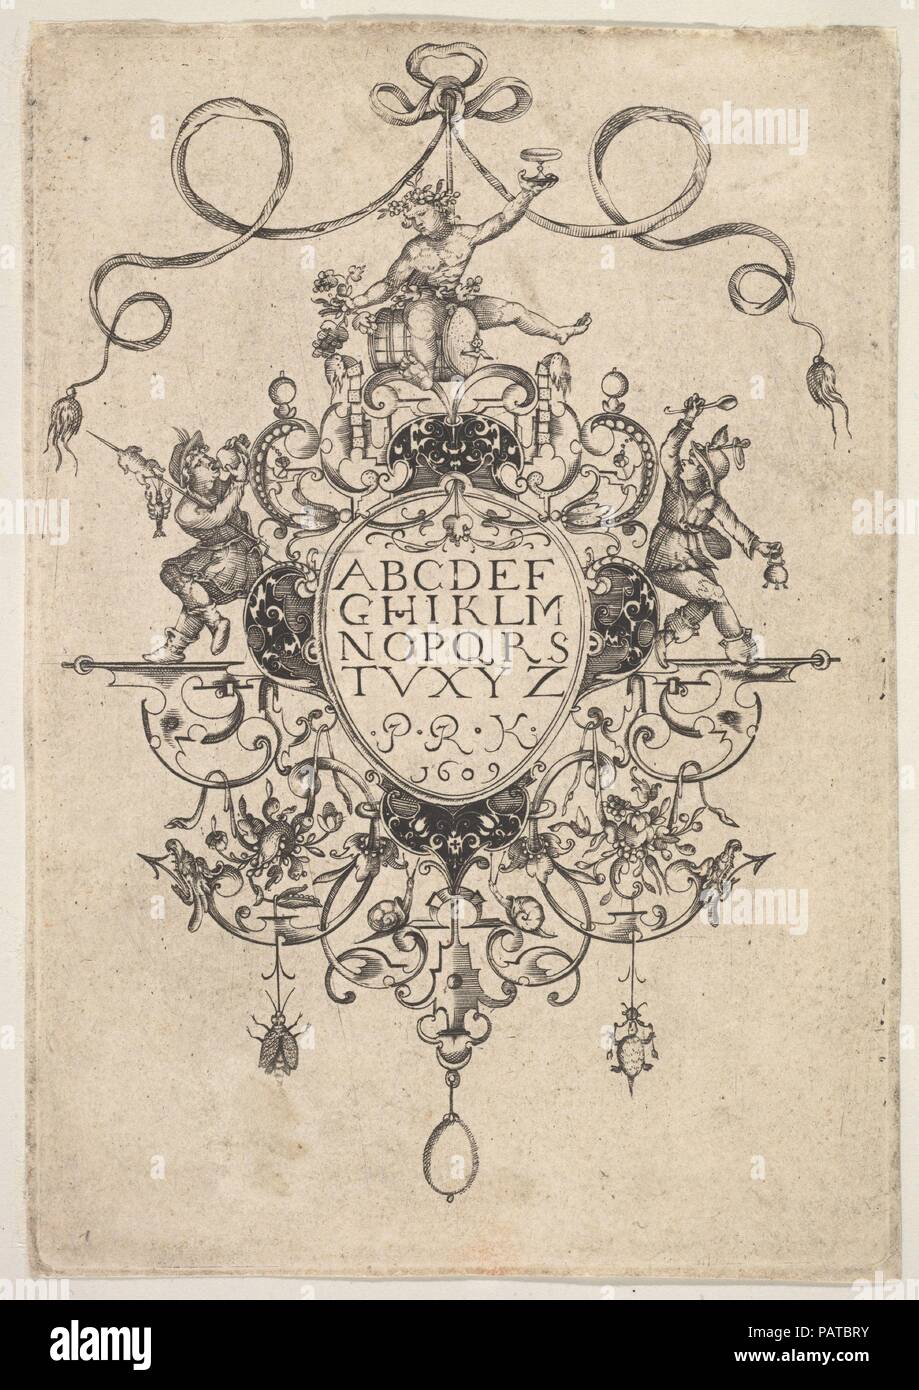 Design for a Pendant with the Alphabet. Artist: Master P.R.K (Dutch, ca. 1609-1617). Dimensions: Plate: 5 5/16 x 3 11/16 in. (13.5 x 9.4 cm)  Sheet: 5 7/16 x 3 13/16 in. (13.8 x 9.7 cm). Date: 1609.  Design for a pendant in fine goldsmiths work. The pendant is hanging from a ribbon and has an oval central compartment in which the alphabet has been placed. The letters J, V and W are missing. Below it is the signature of the Master PRK combined with the date of publishing. Surrounding the compartment are four small enameled fields and fine openwork made up out of Schweifwerk. Three figures are a Stock Photo